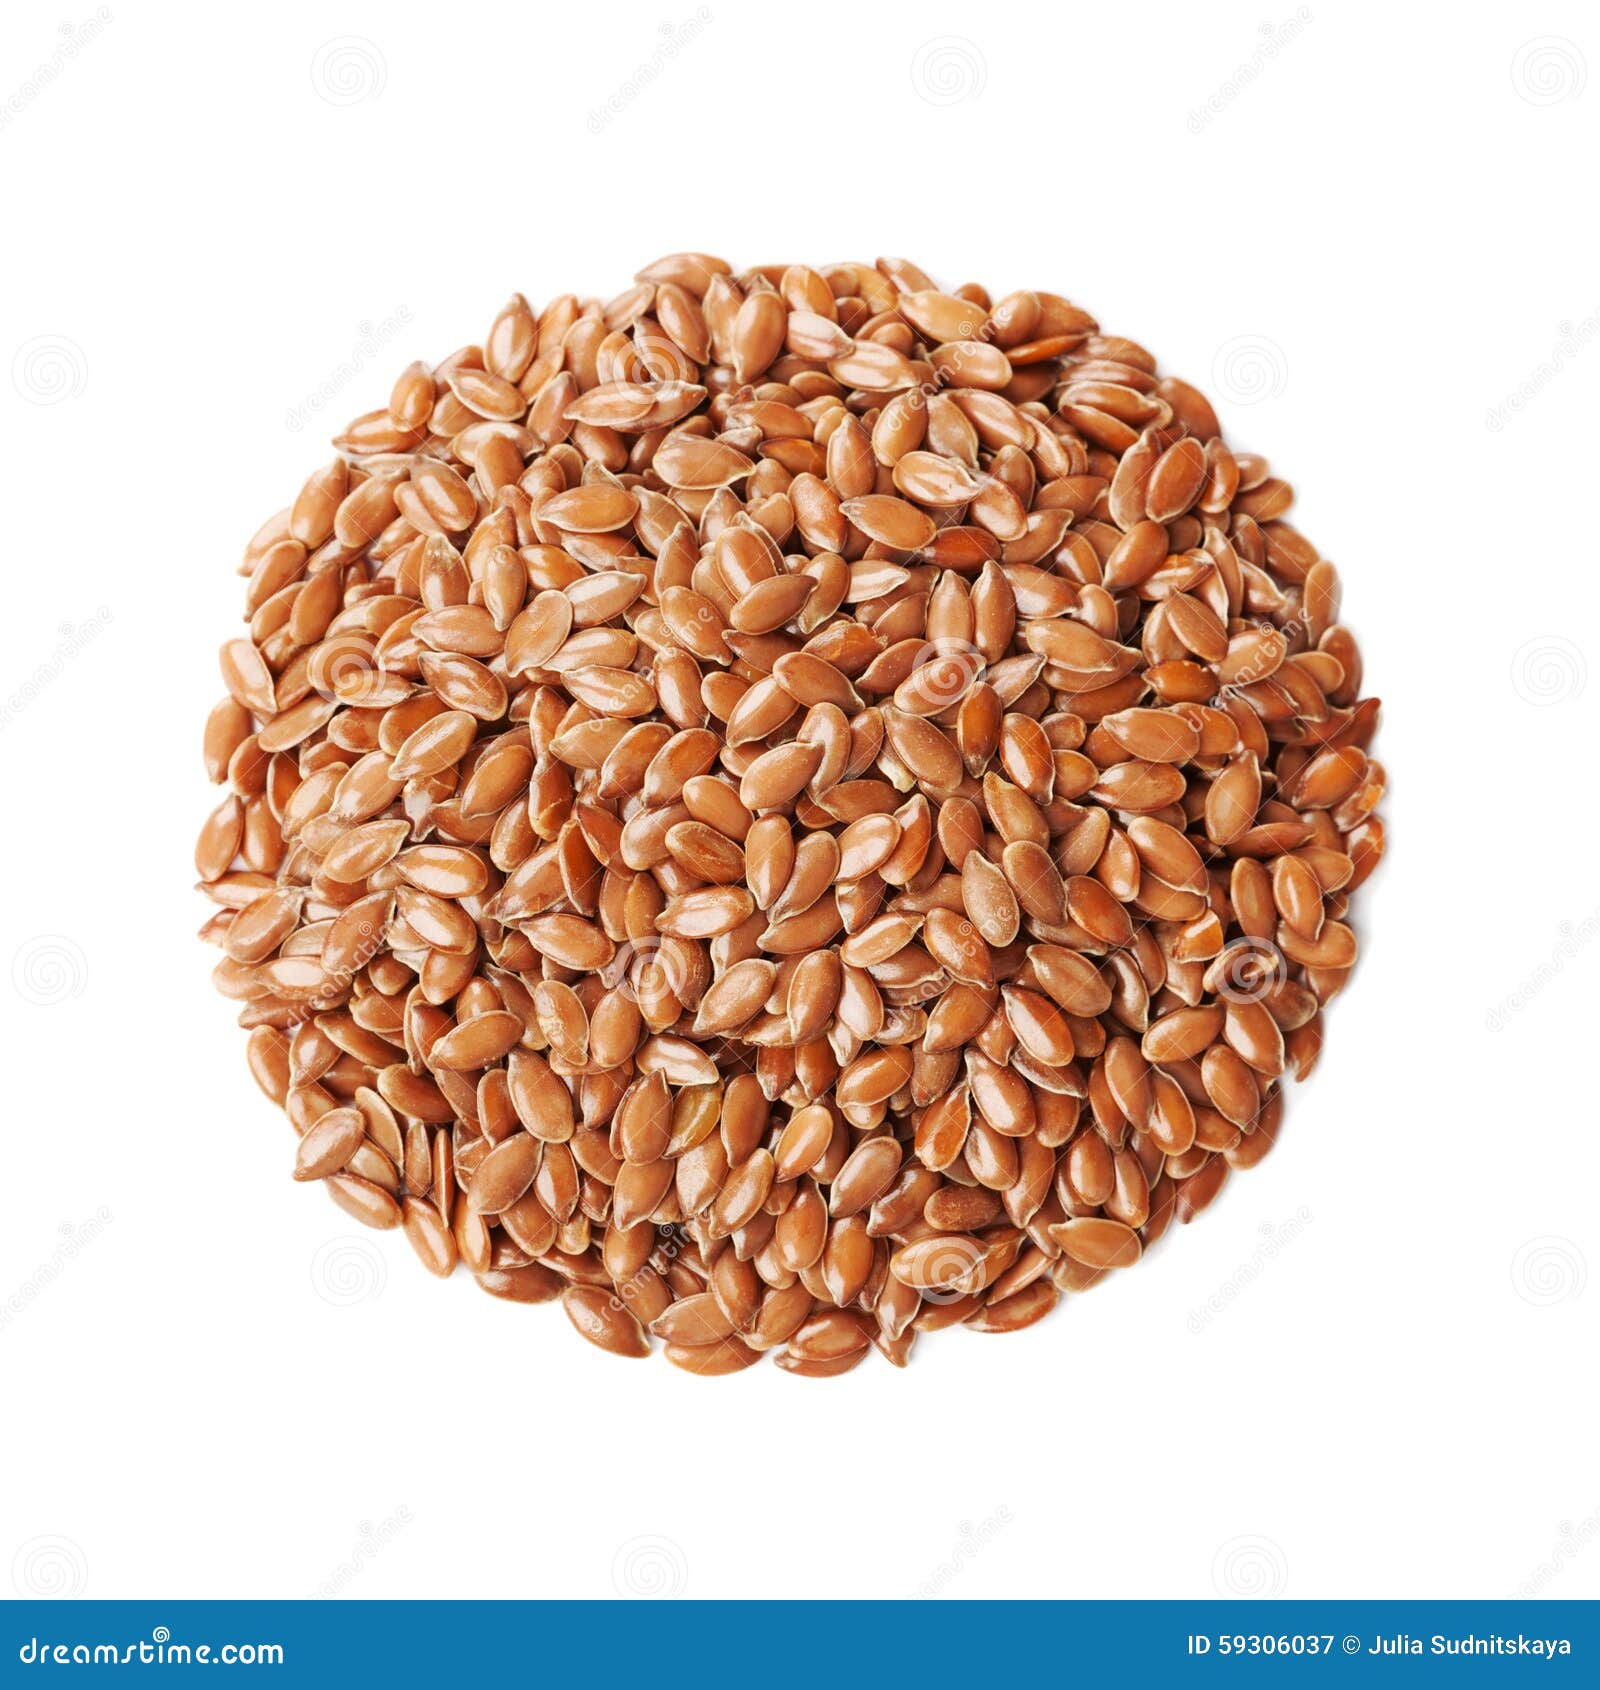 closeup of flax seed or linseed  on white